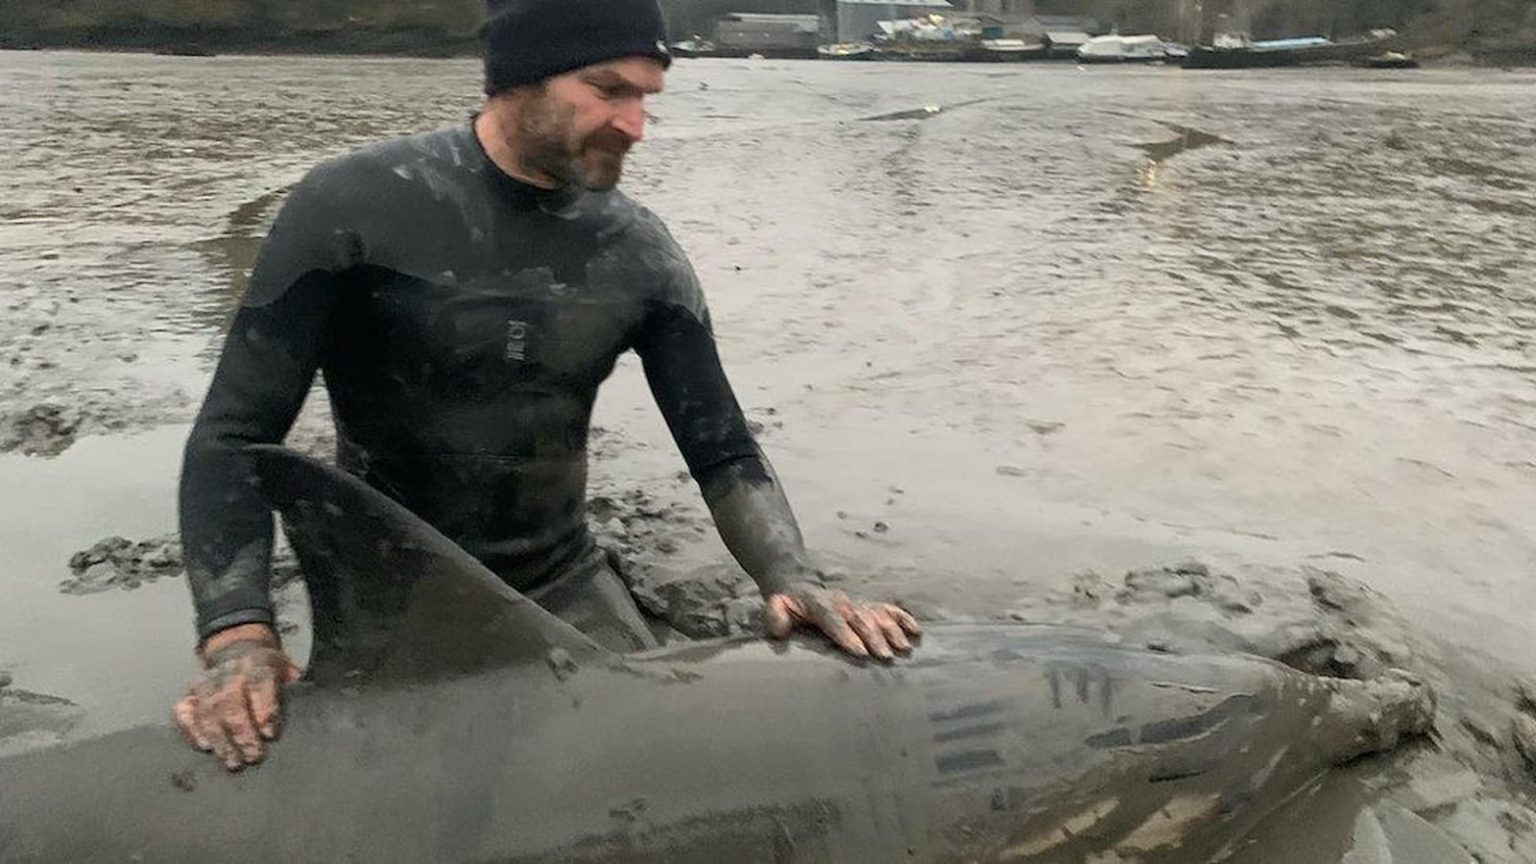 Monty Halls rescues stranded dolphin